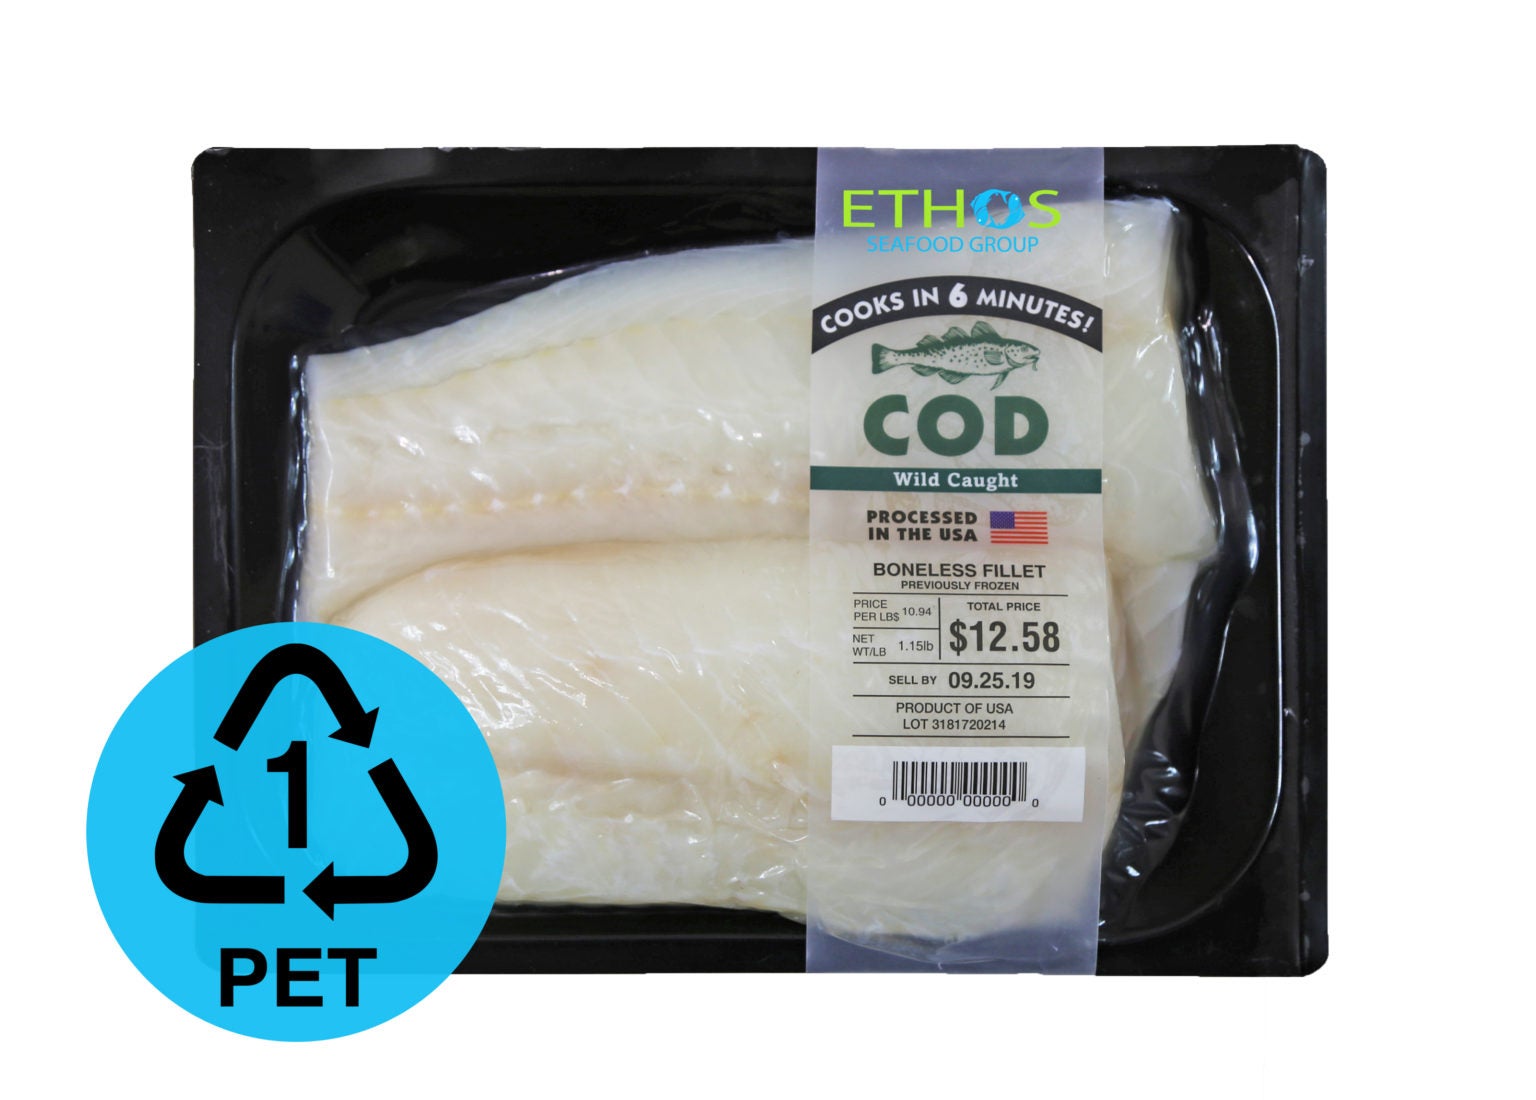 ESG switches seafood packaging to PET recyclable material